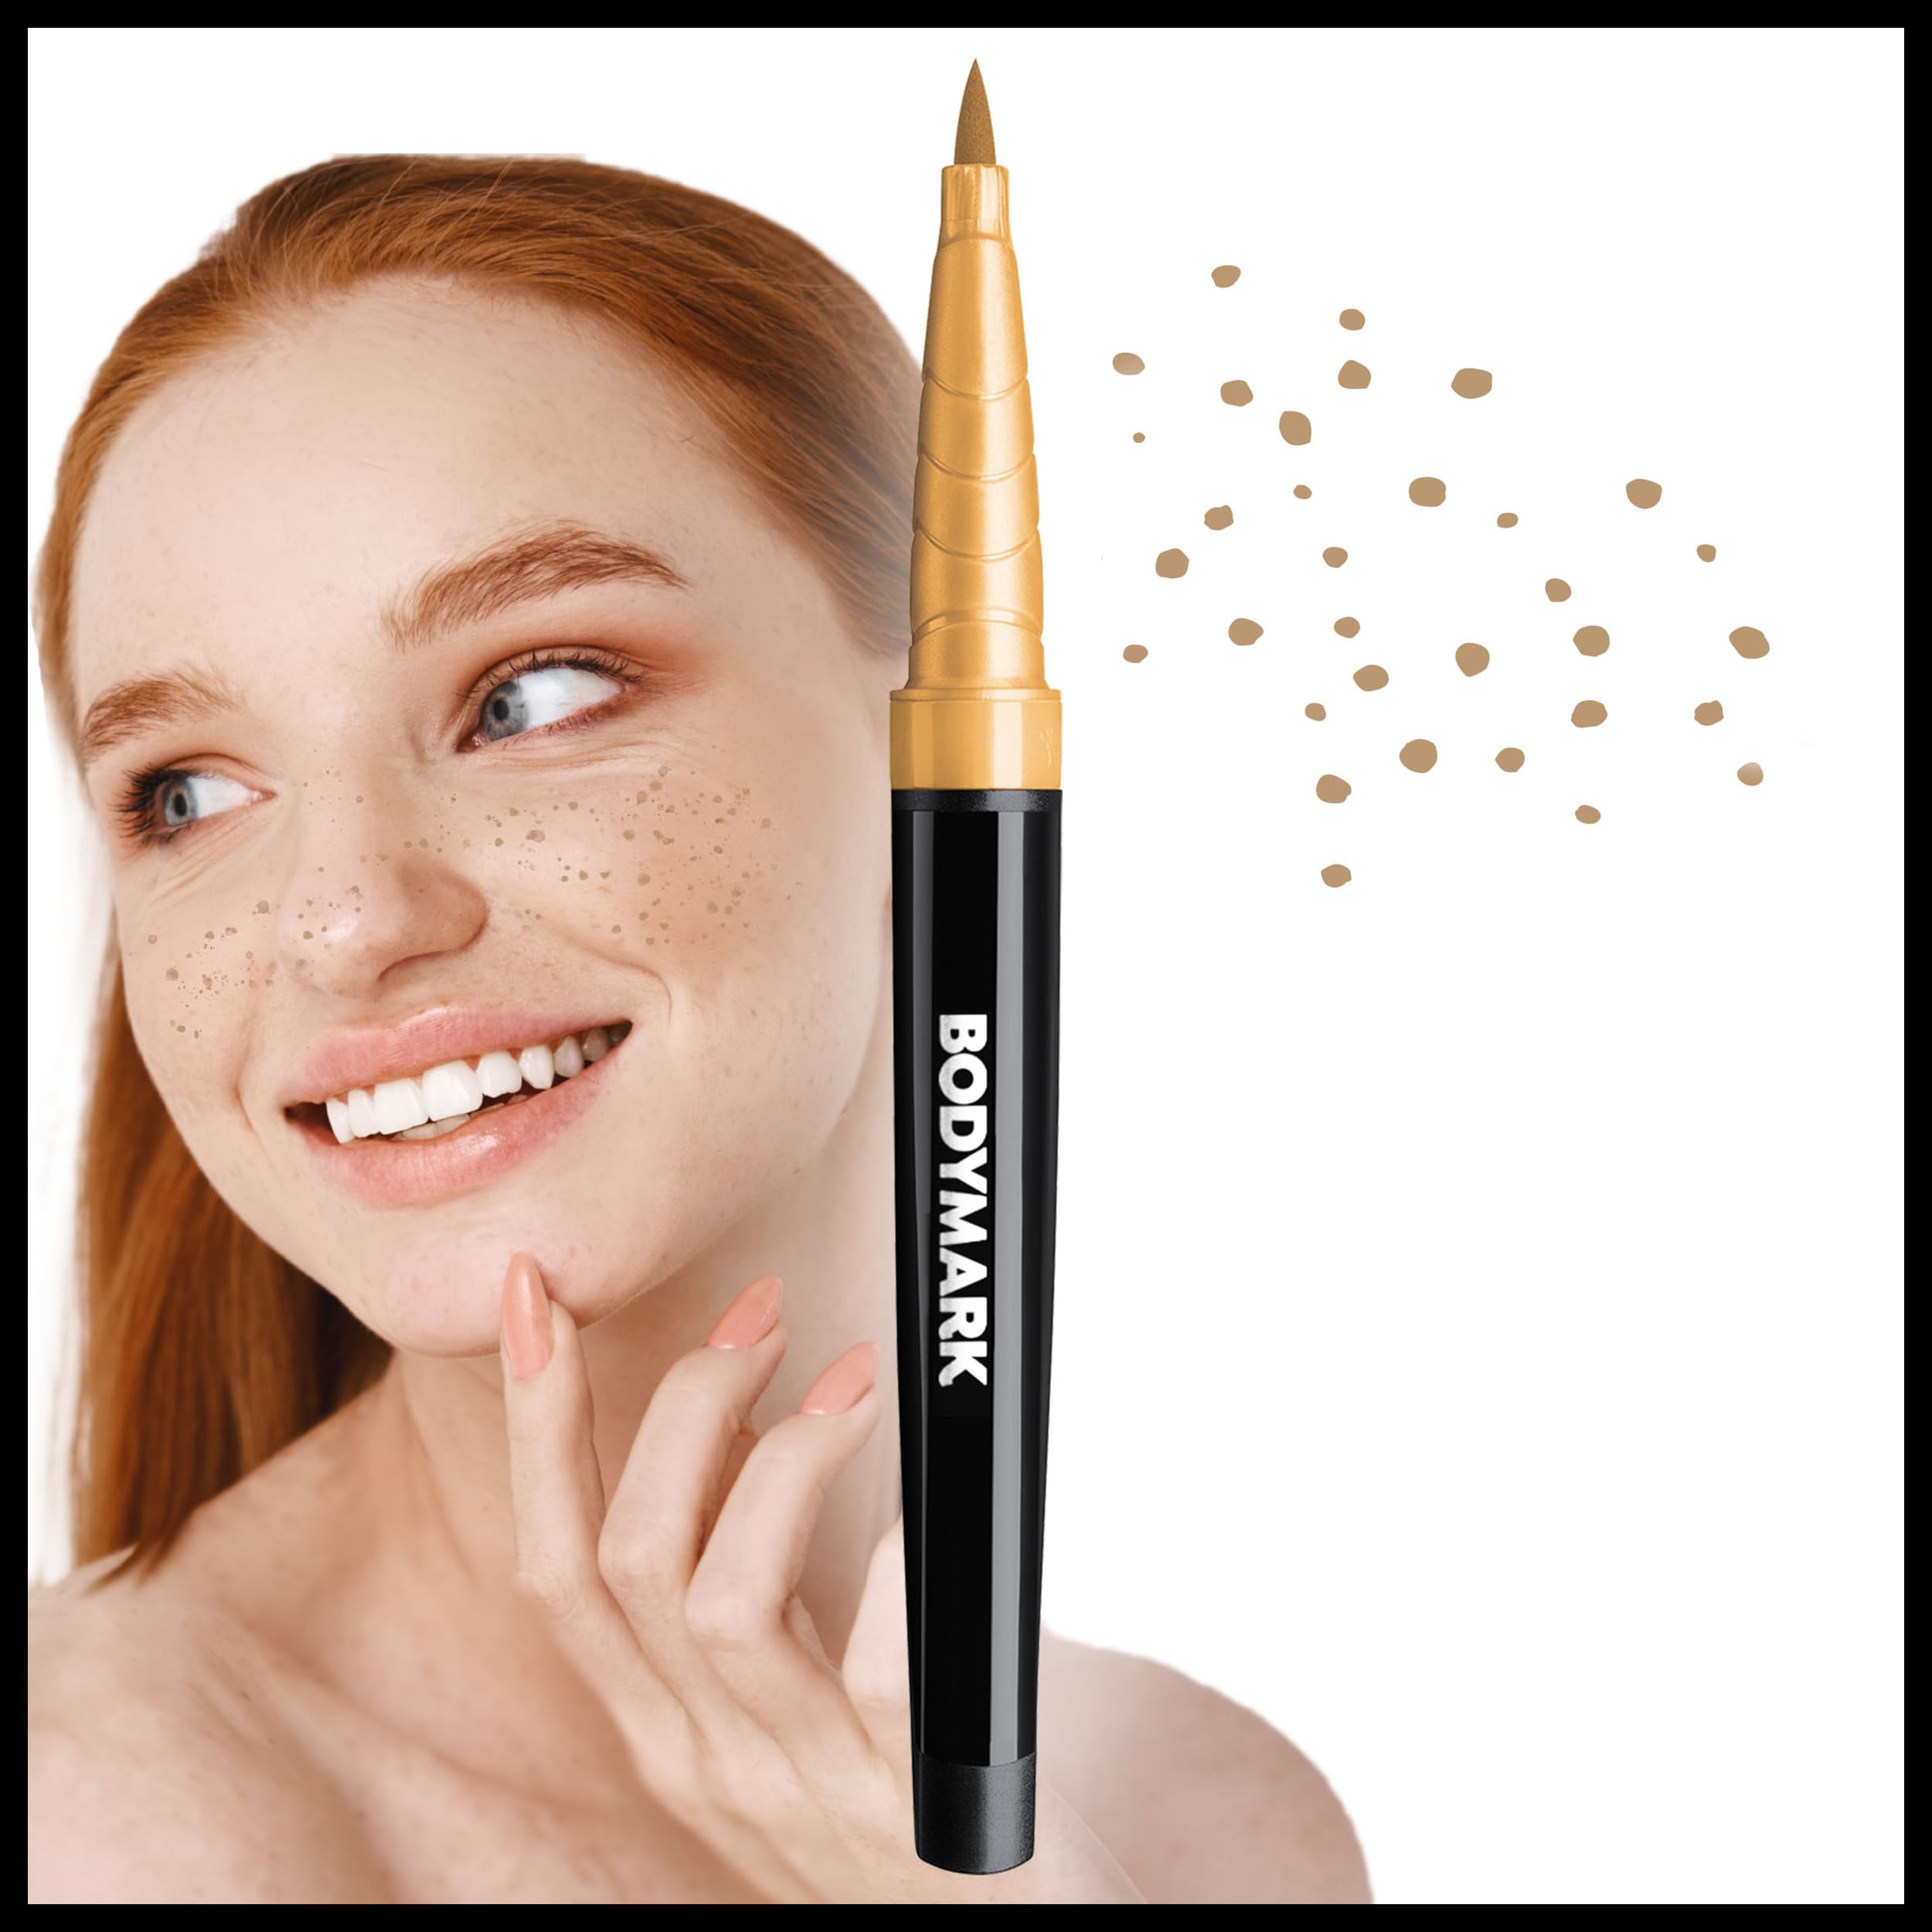 BodyMark Freckle Pen, Soft Brush Tip, 1 Count Pen in Light Brown Freckle, Cosmetic Quality Freckle Pens for Skin